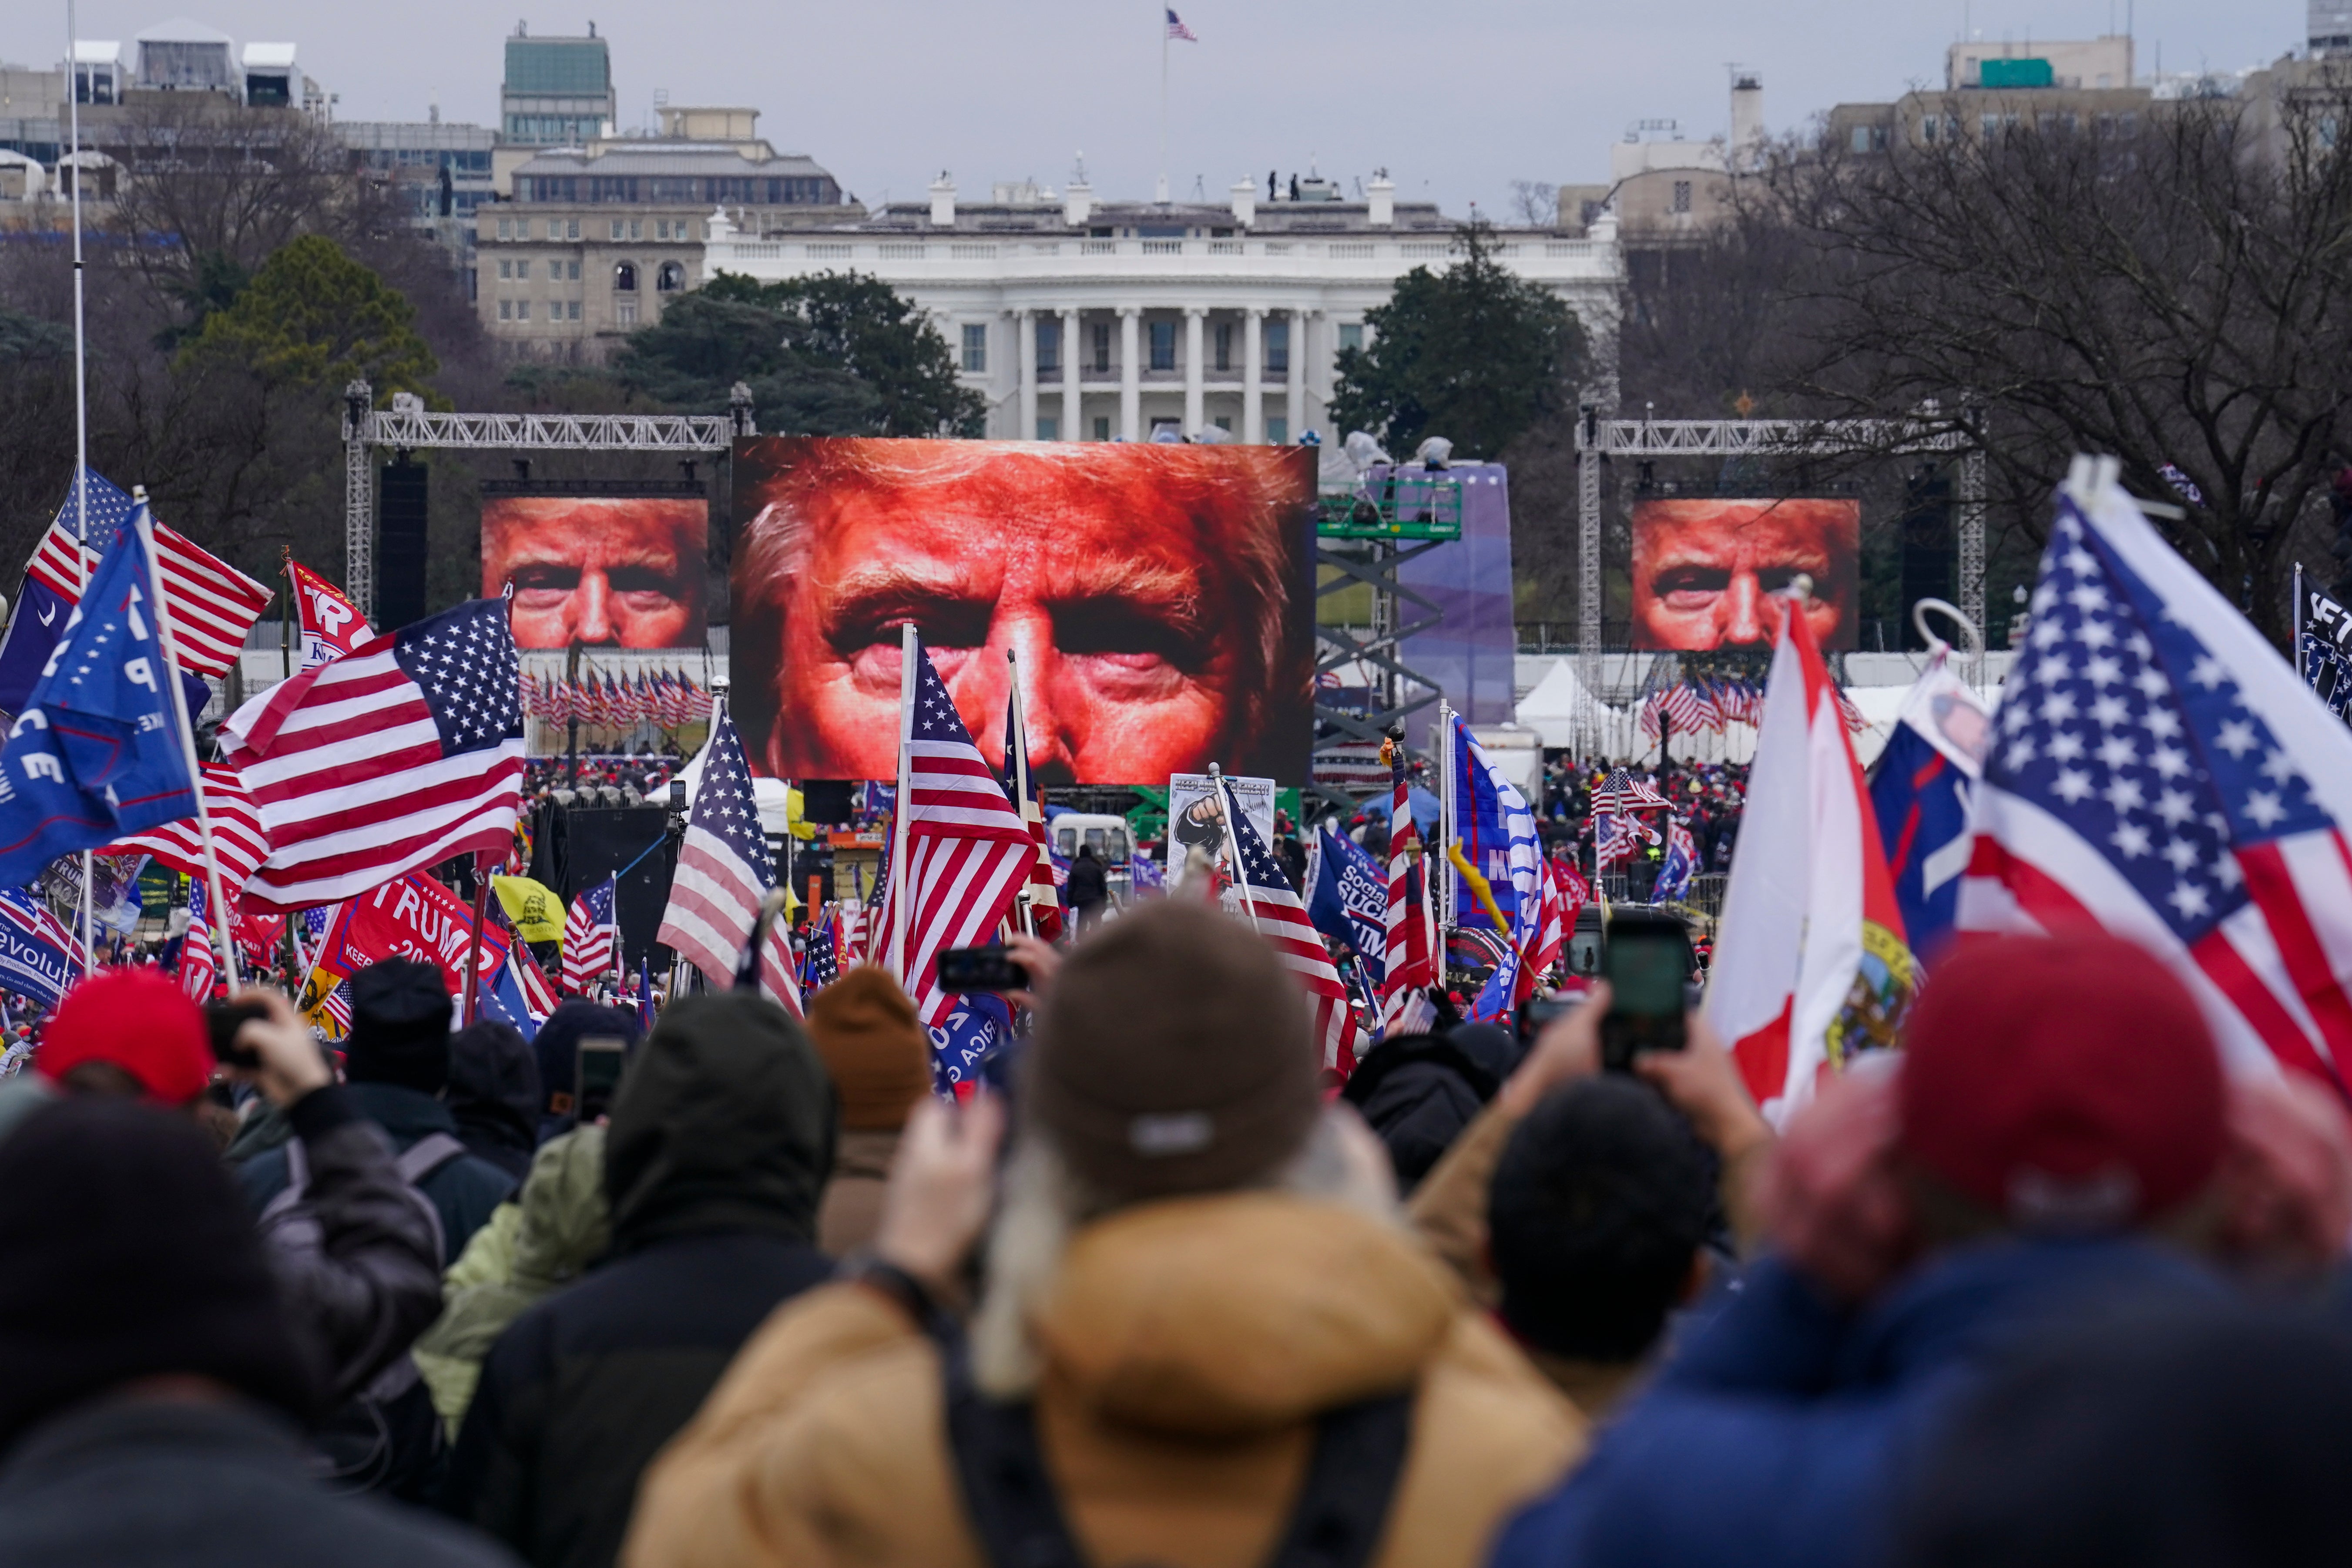 Trump supporters participate in a rally in Washington, on 6 Jan 2021, that some blame for fuelling the attack on the US Capitol